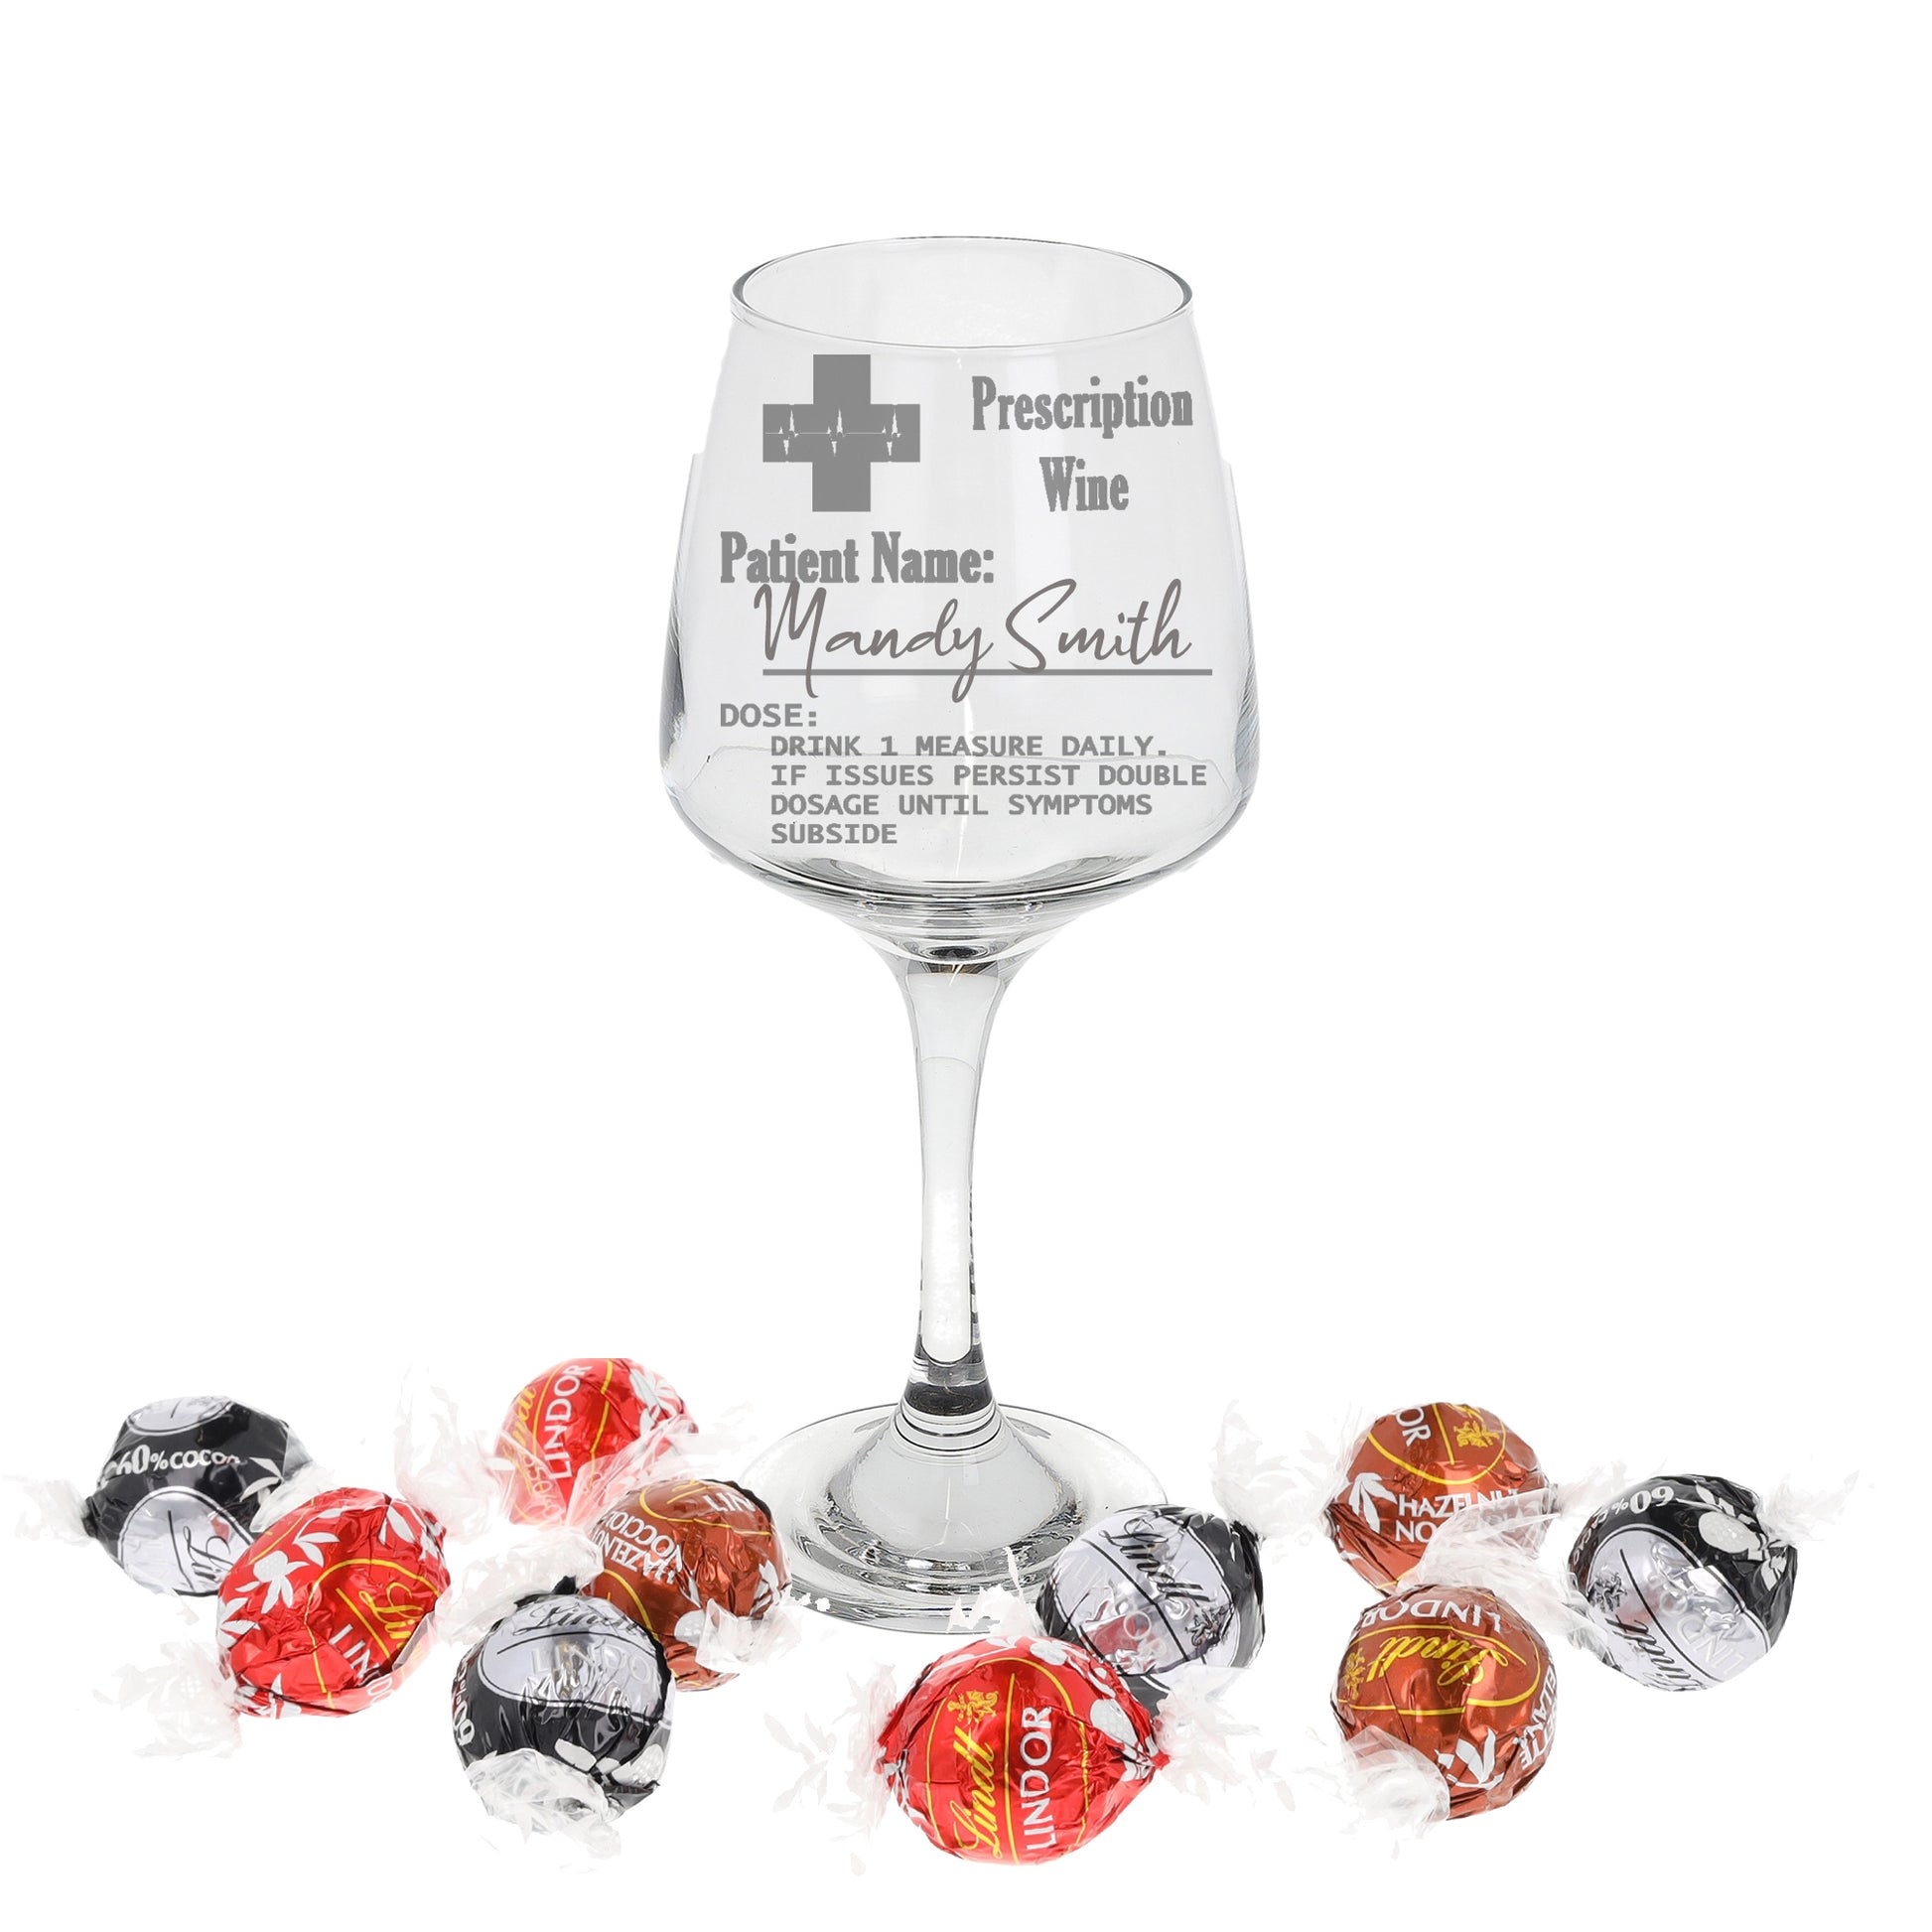 Personalised Engraved Prescription Wine Glass Gift  - Always Looking Good - Small - Filled with Lindt Chocolates  